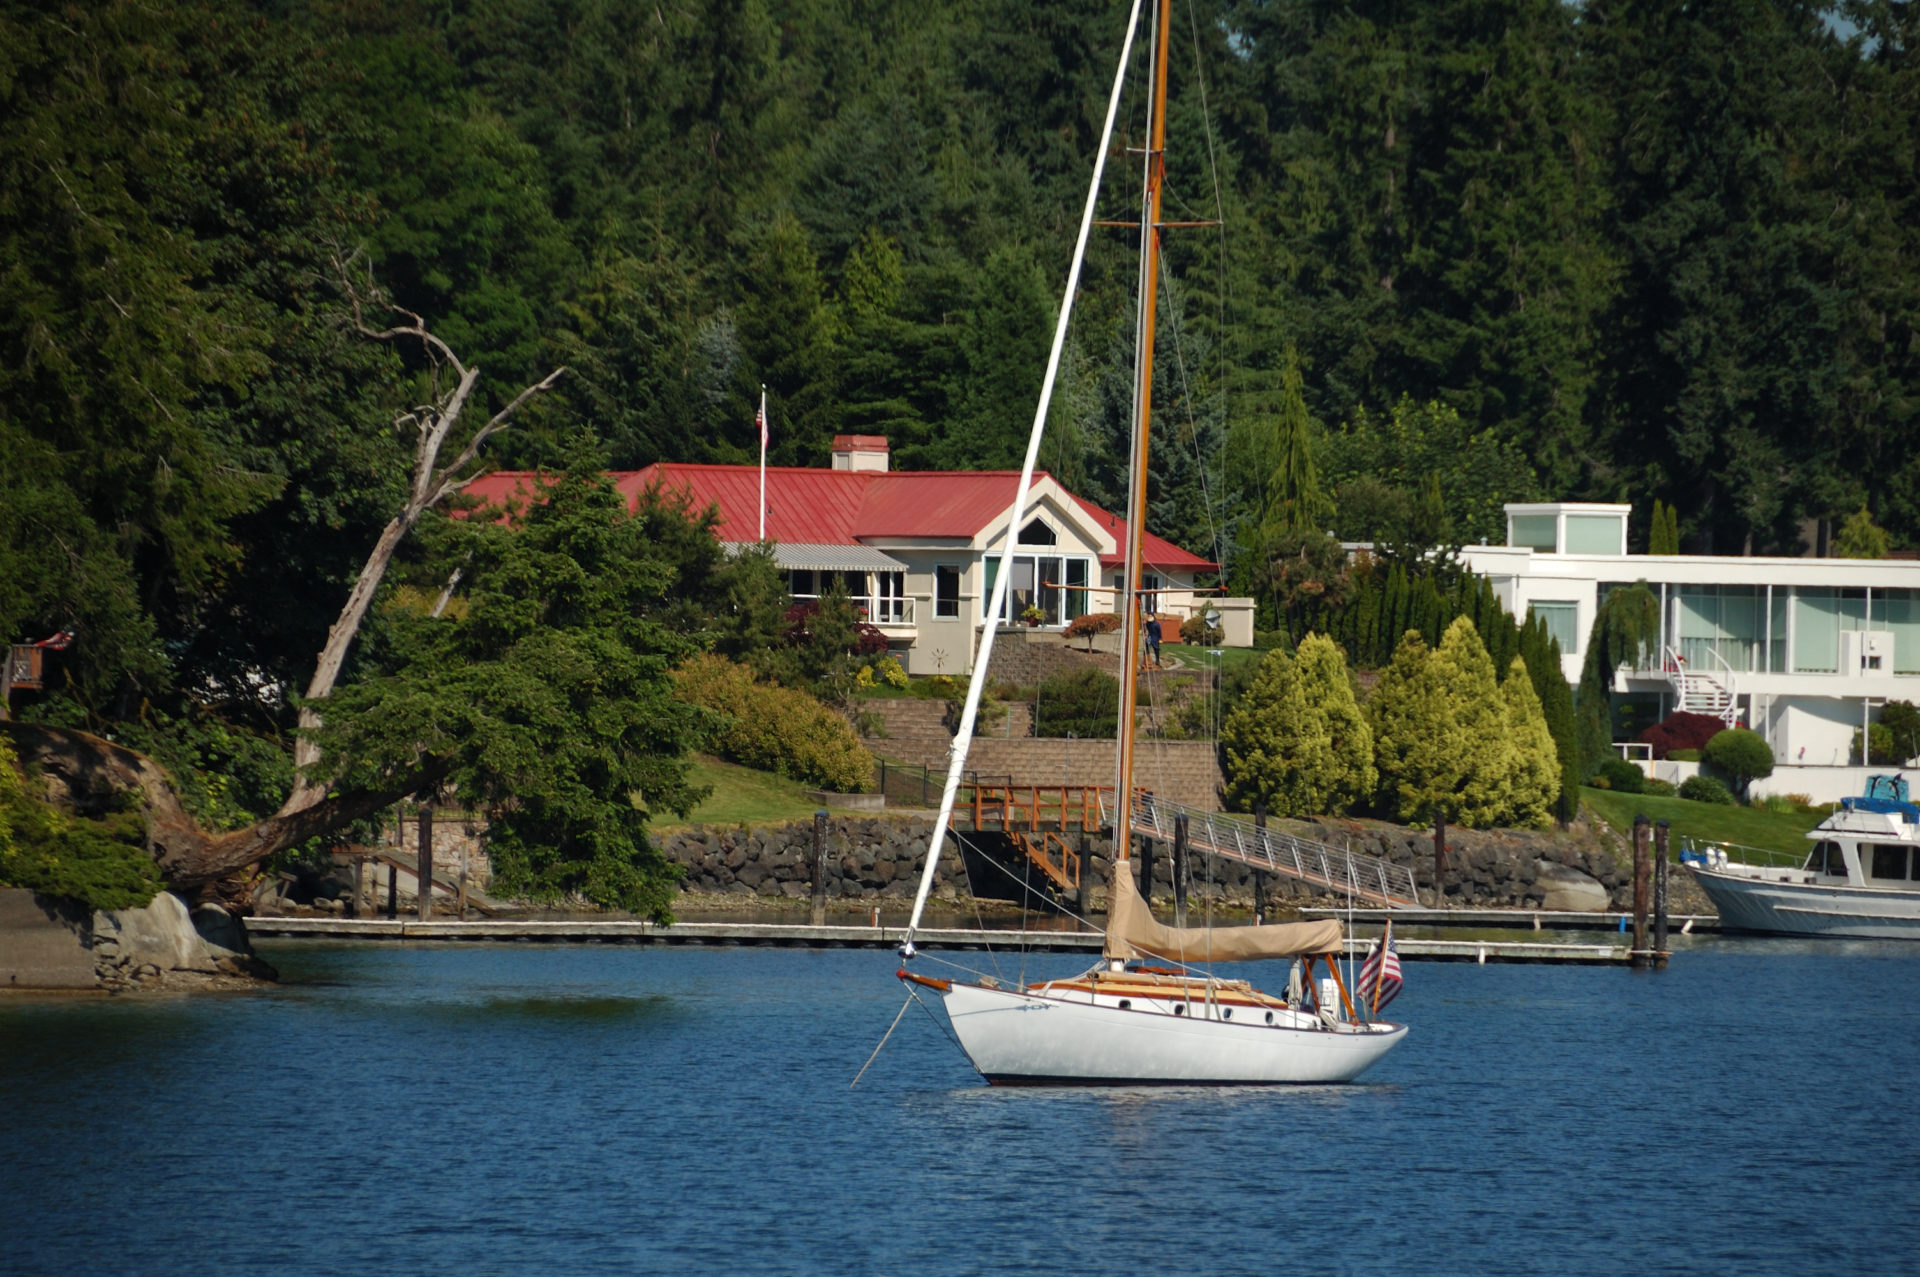 Wollochet Bay is lined with homes, but is still a good anchorage.